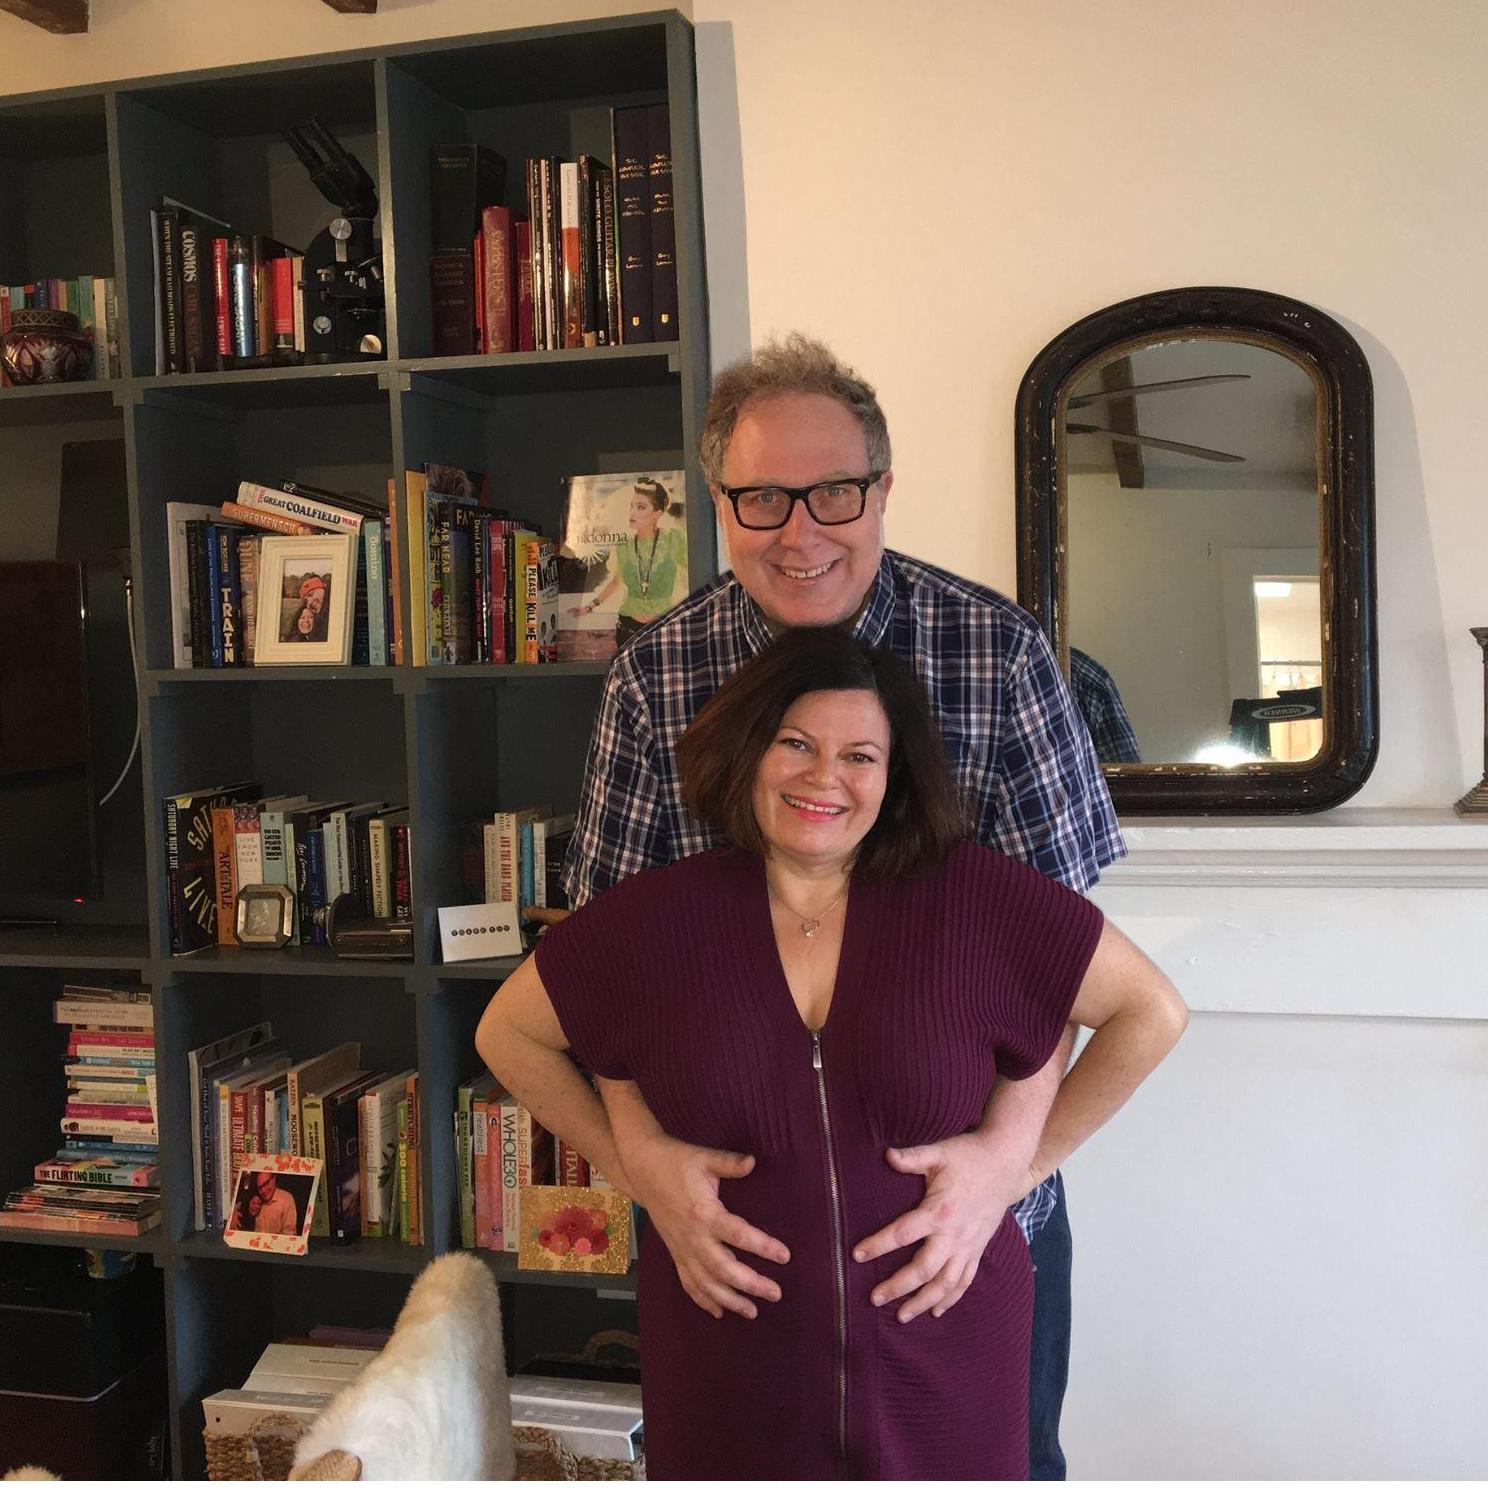 Not to be cliche, but, three months later..."we're pregnant!" A joyful moment for us.